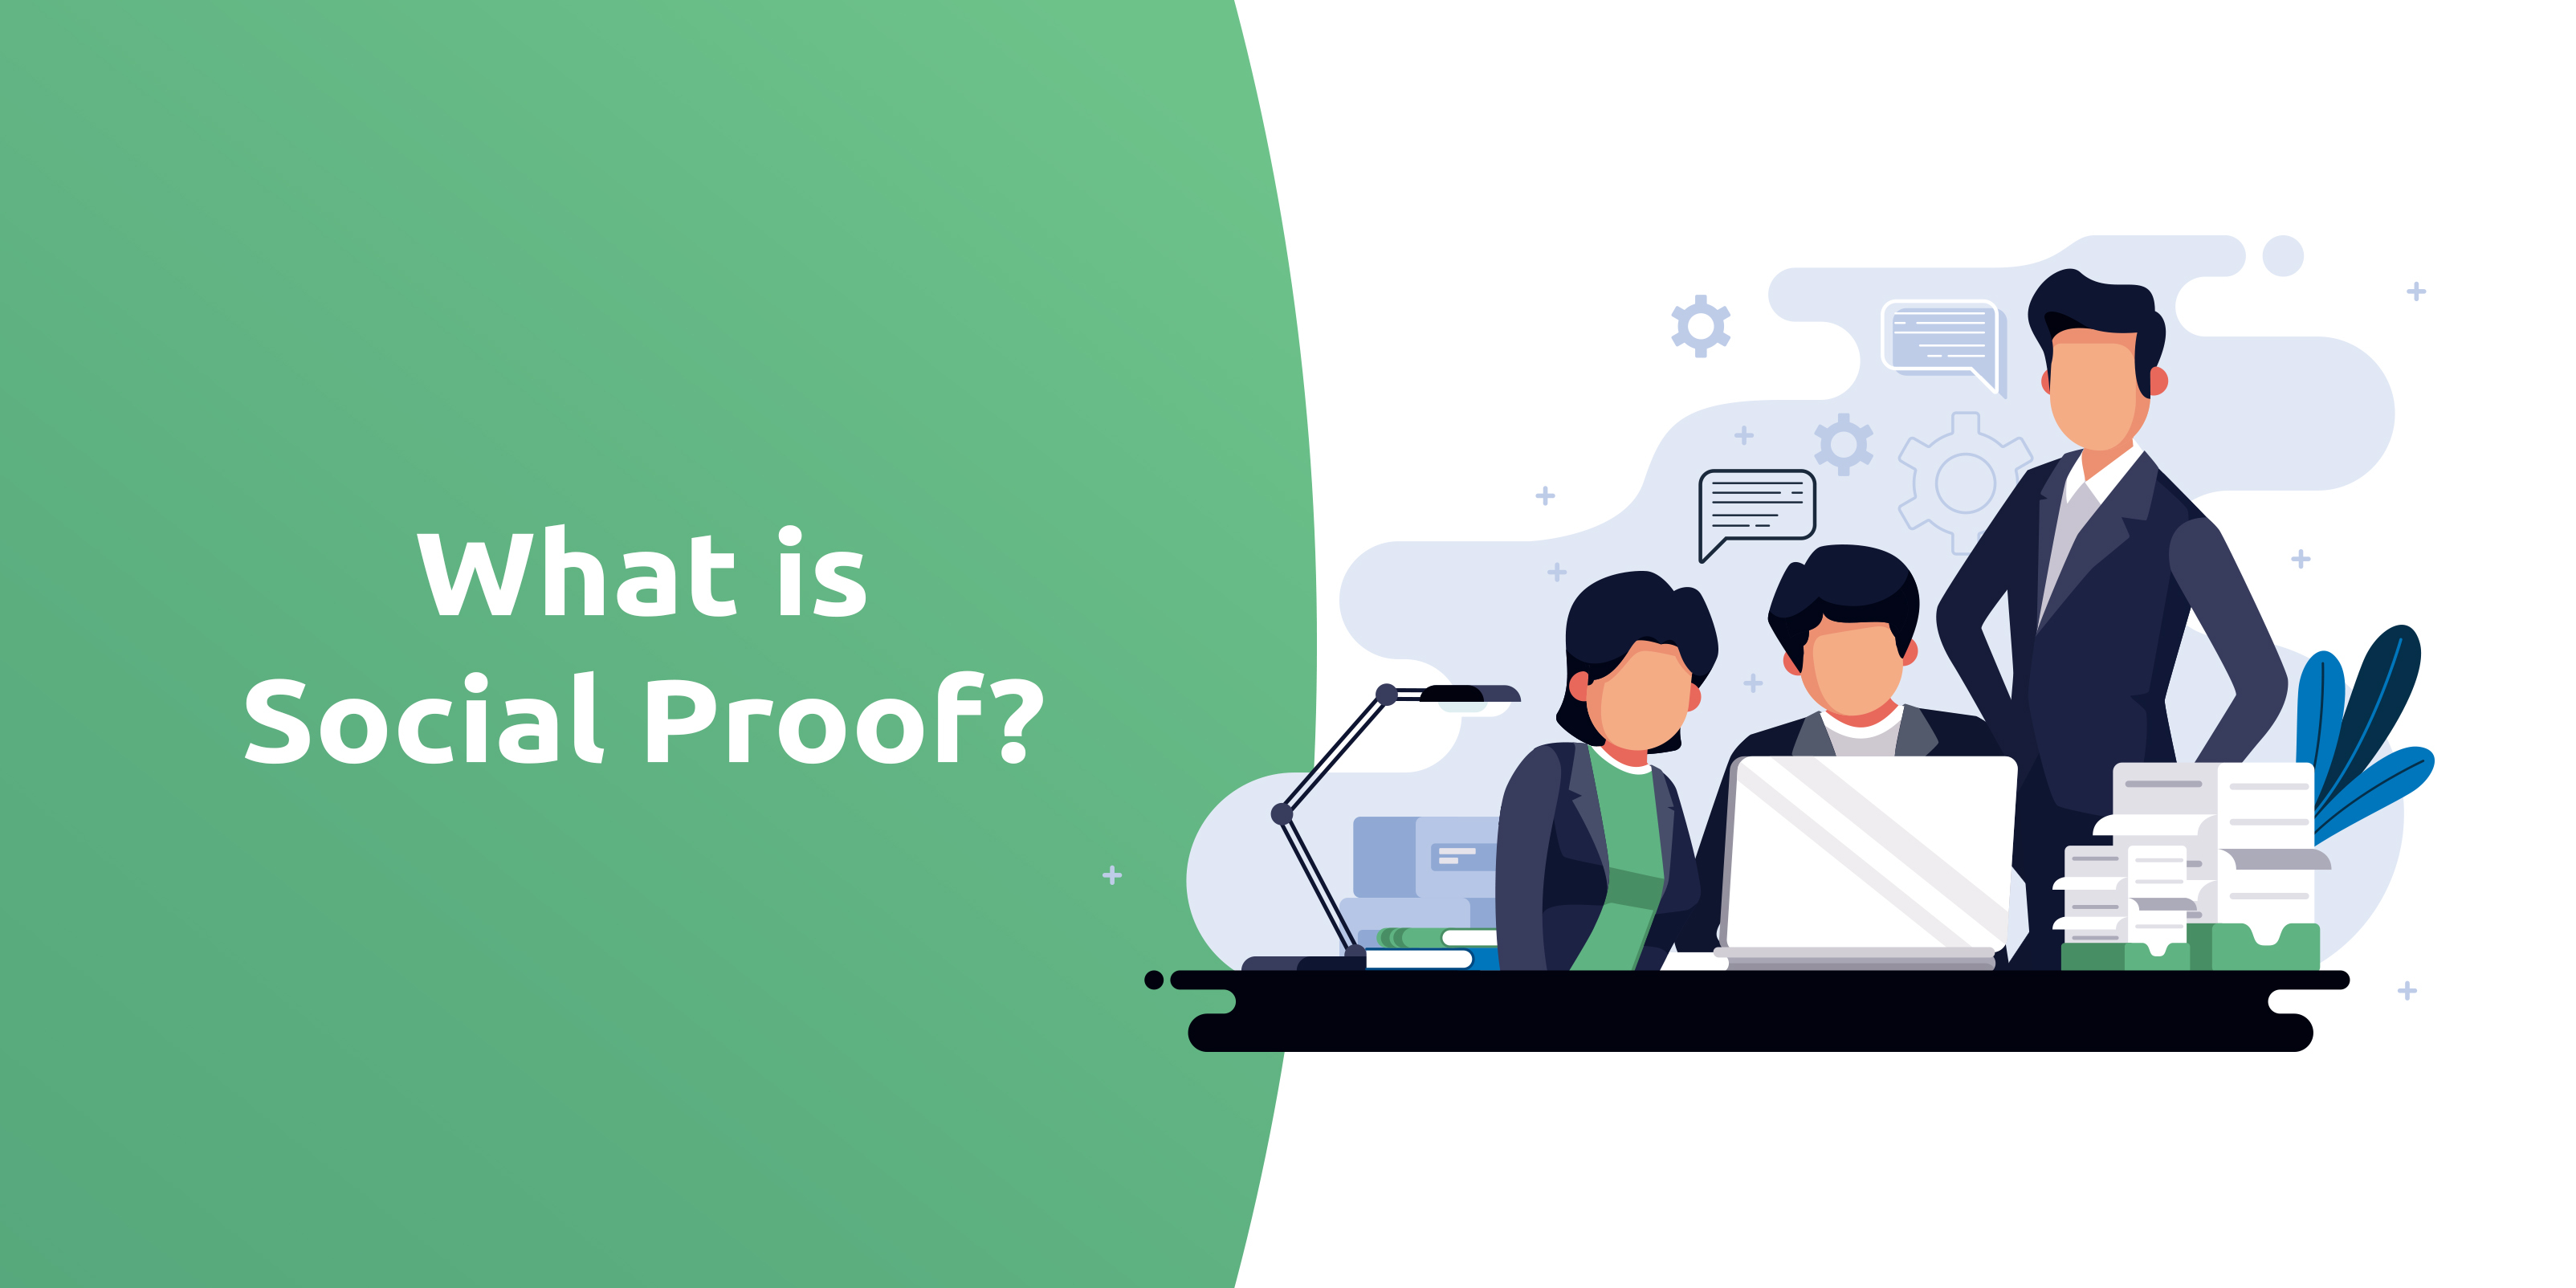 What is Social Proof and Why is it Important for Your Business?